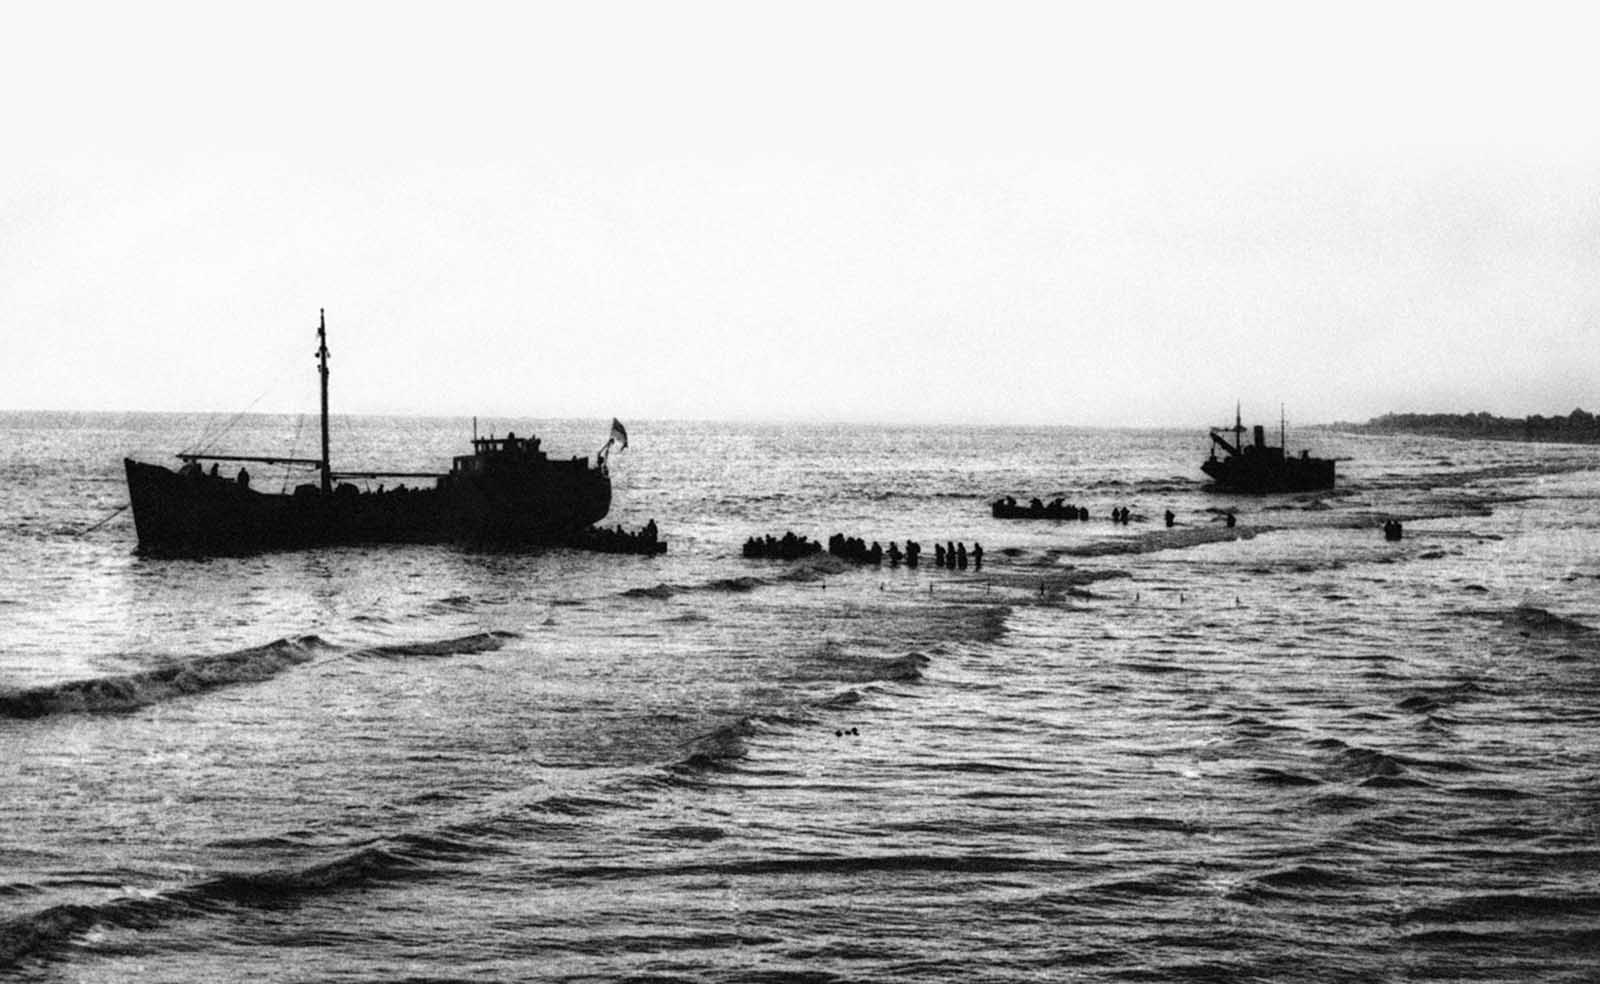 British and French troops wade through shallow water along the beach at Dunkirk, France on June 13, 1940 toward small rescue craft that will bring them to England. Some 700 private vessels joined dozens of military craft to ferry the men across the channel.